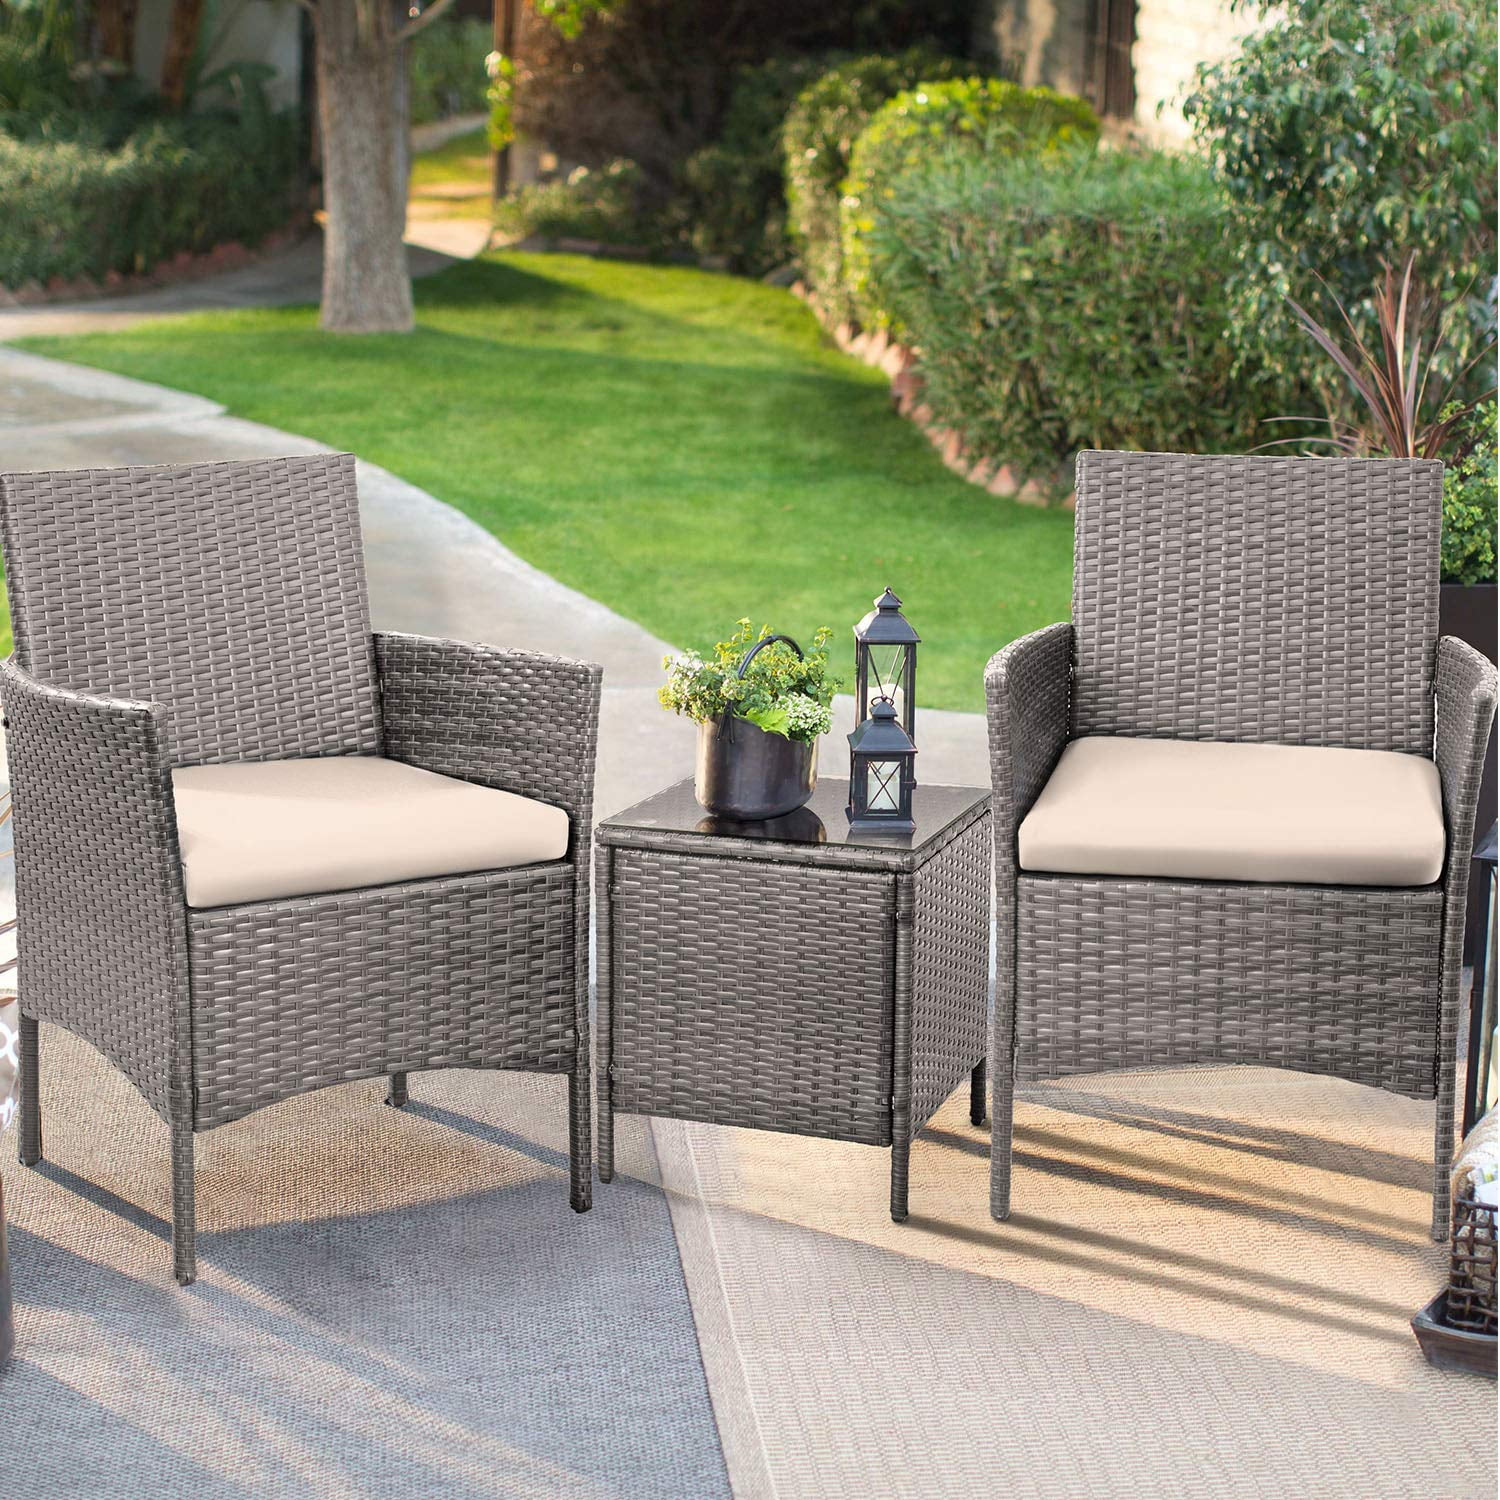 Walnew 3 PCS Outdoor Patio Furniture Gray PE Rattan Wicker Table and